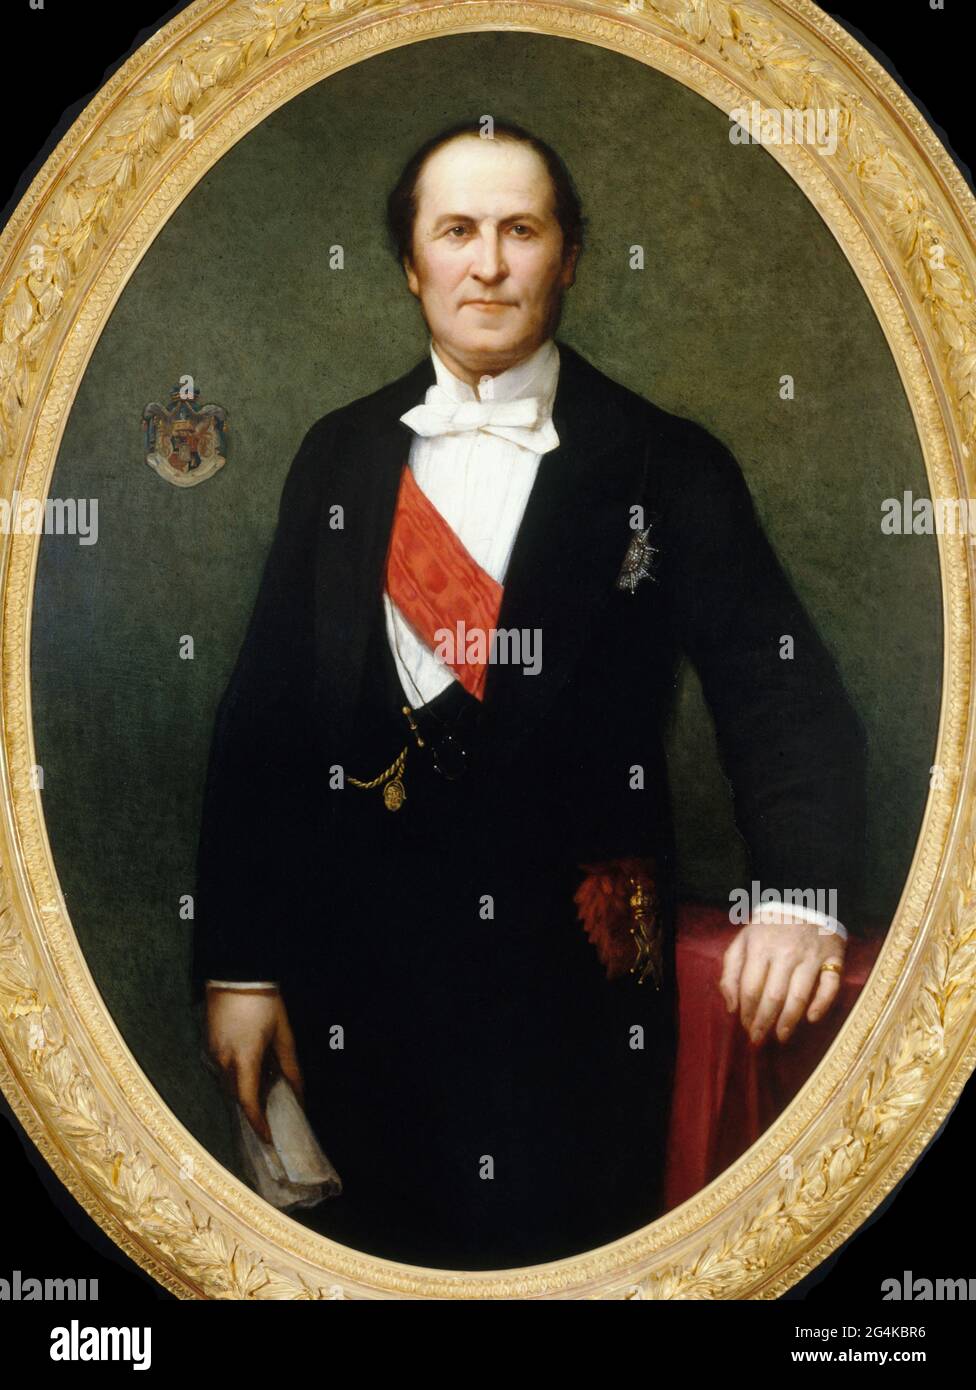 Portrait of Georges-Eug&#xe8;ne Baron Haussmann (1809-1891), ca 1860. Found in the collection of Mus&#xe9;e Carnavalet, Paris. Stock Photo